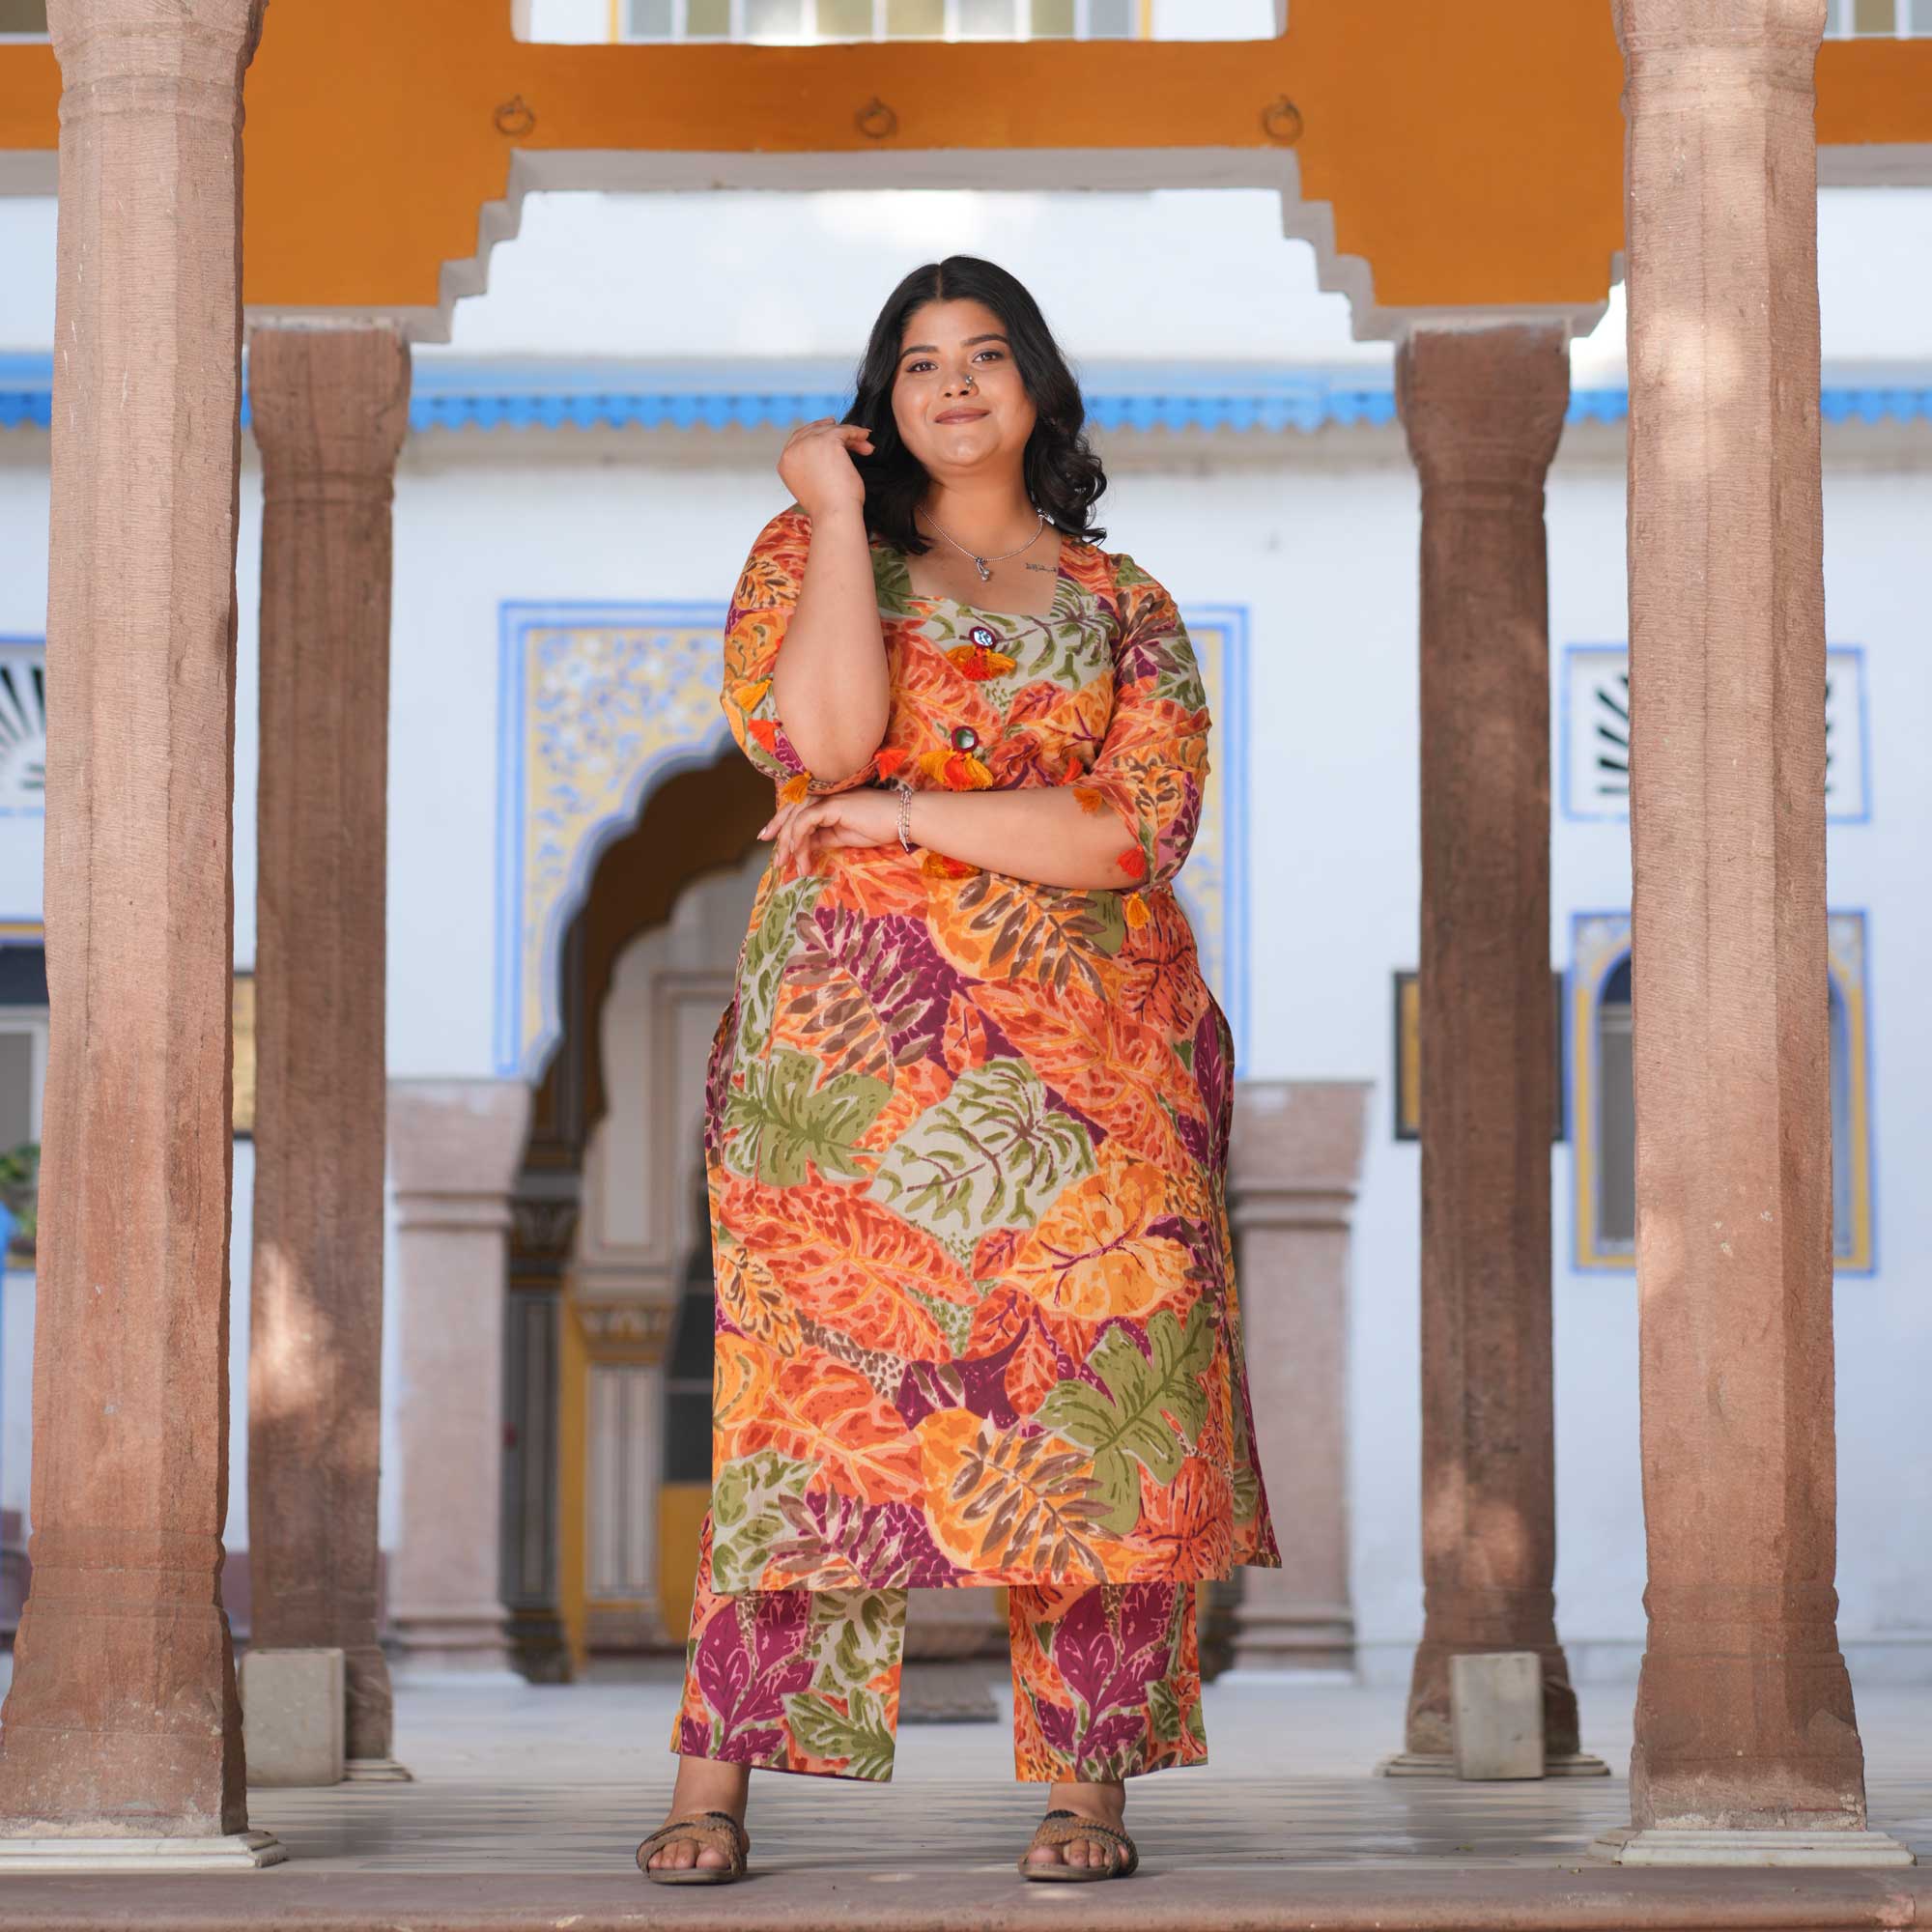 Plus Size Dresses for sale in Chennai, India